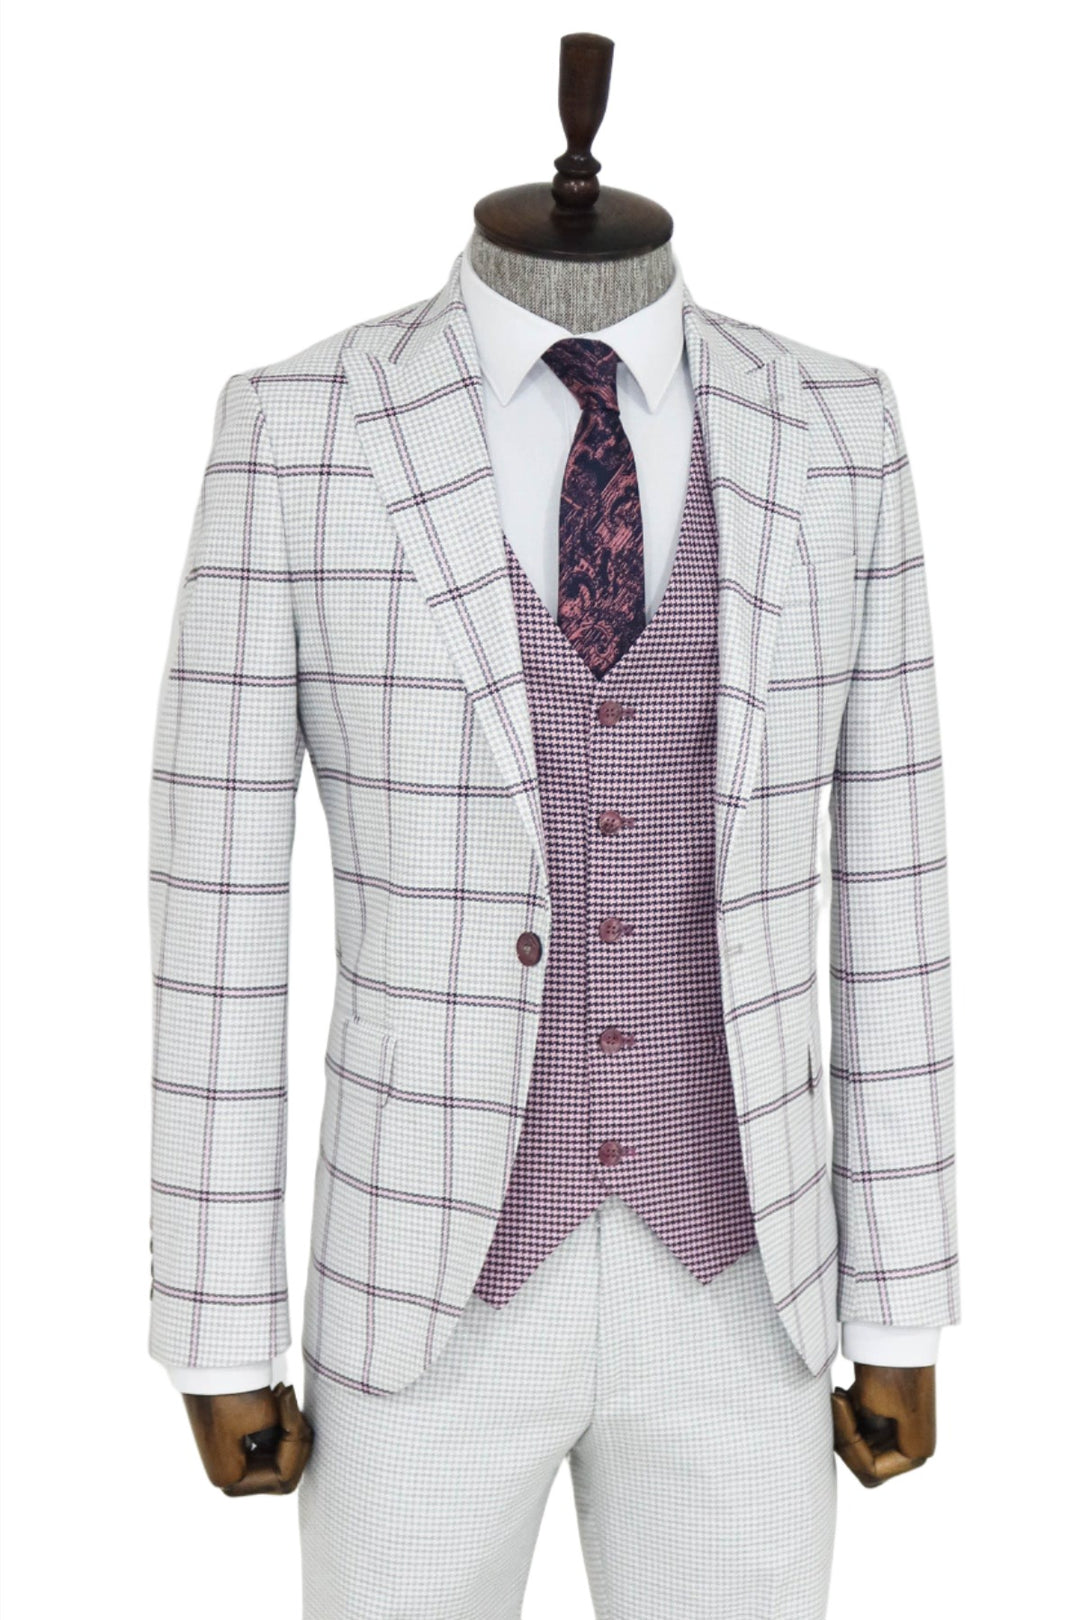 Checked Patterned Vested Light Grey Men Suit and Shirt Combination - Wessi